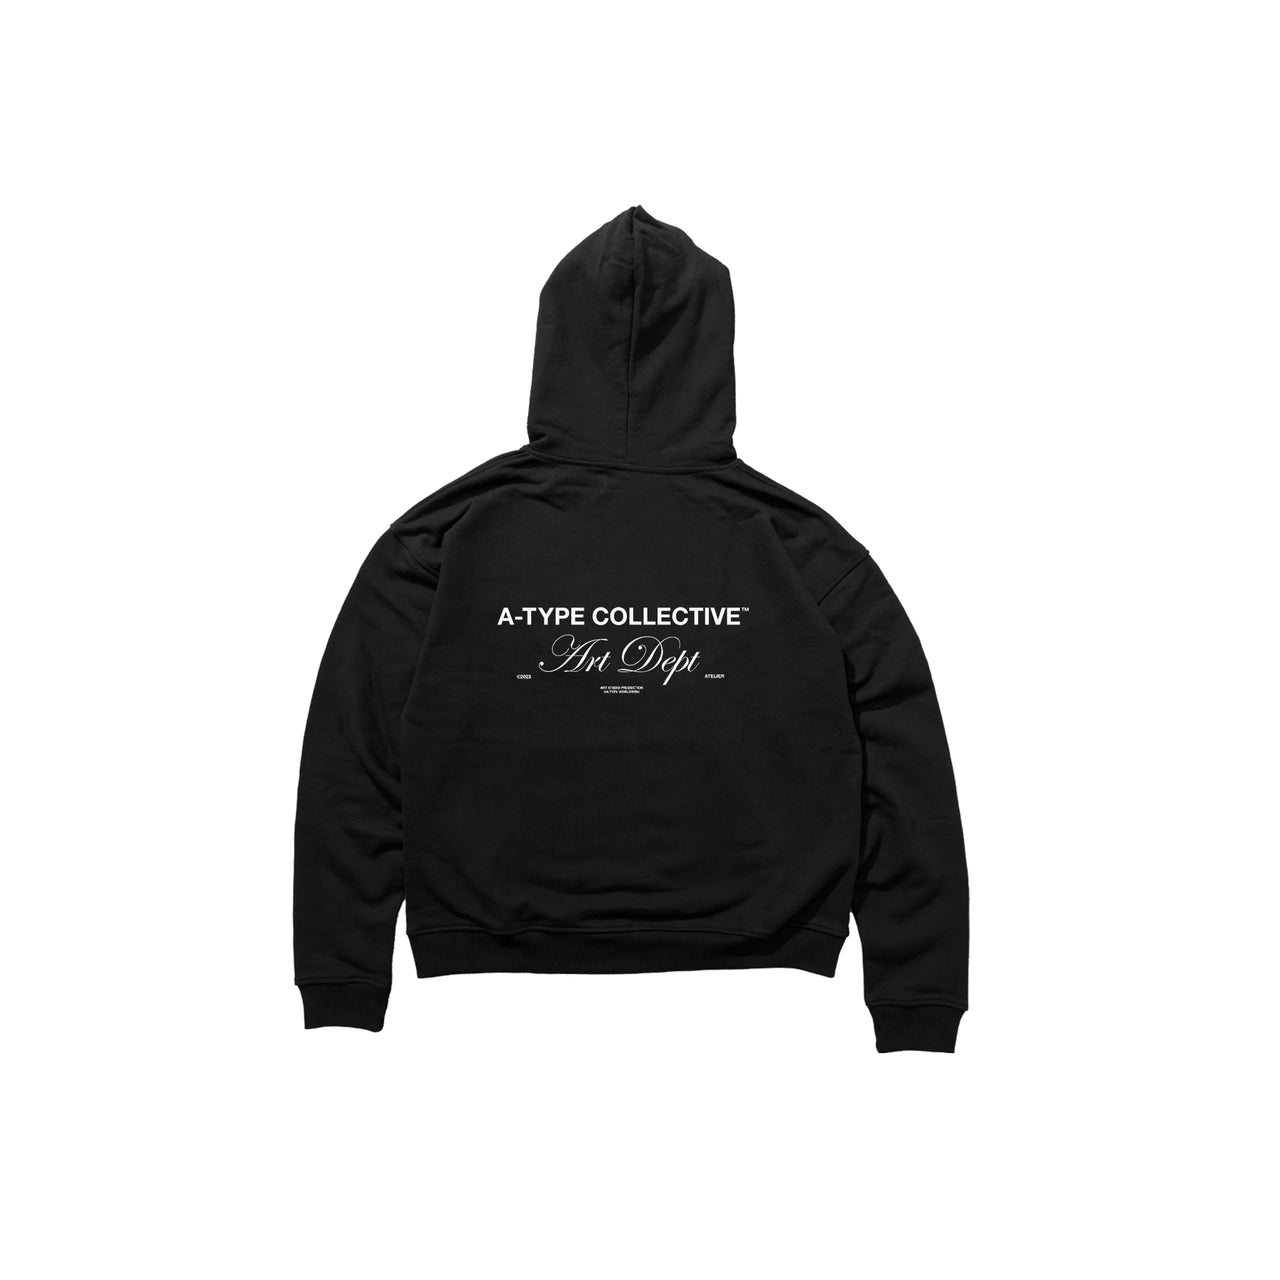 A-TYPE COLLECTIVE Official Store | A-TYPE